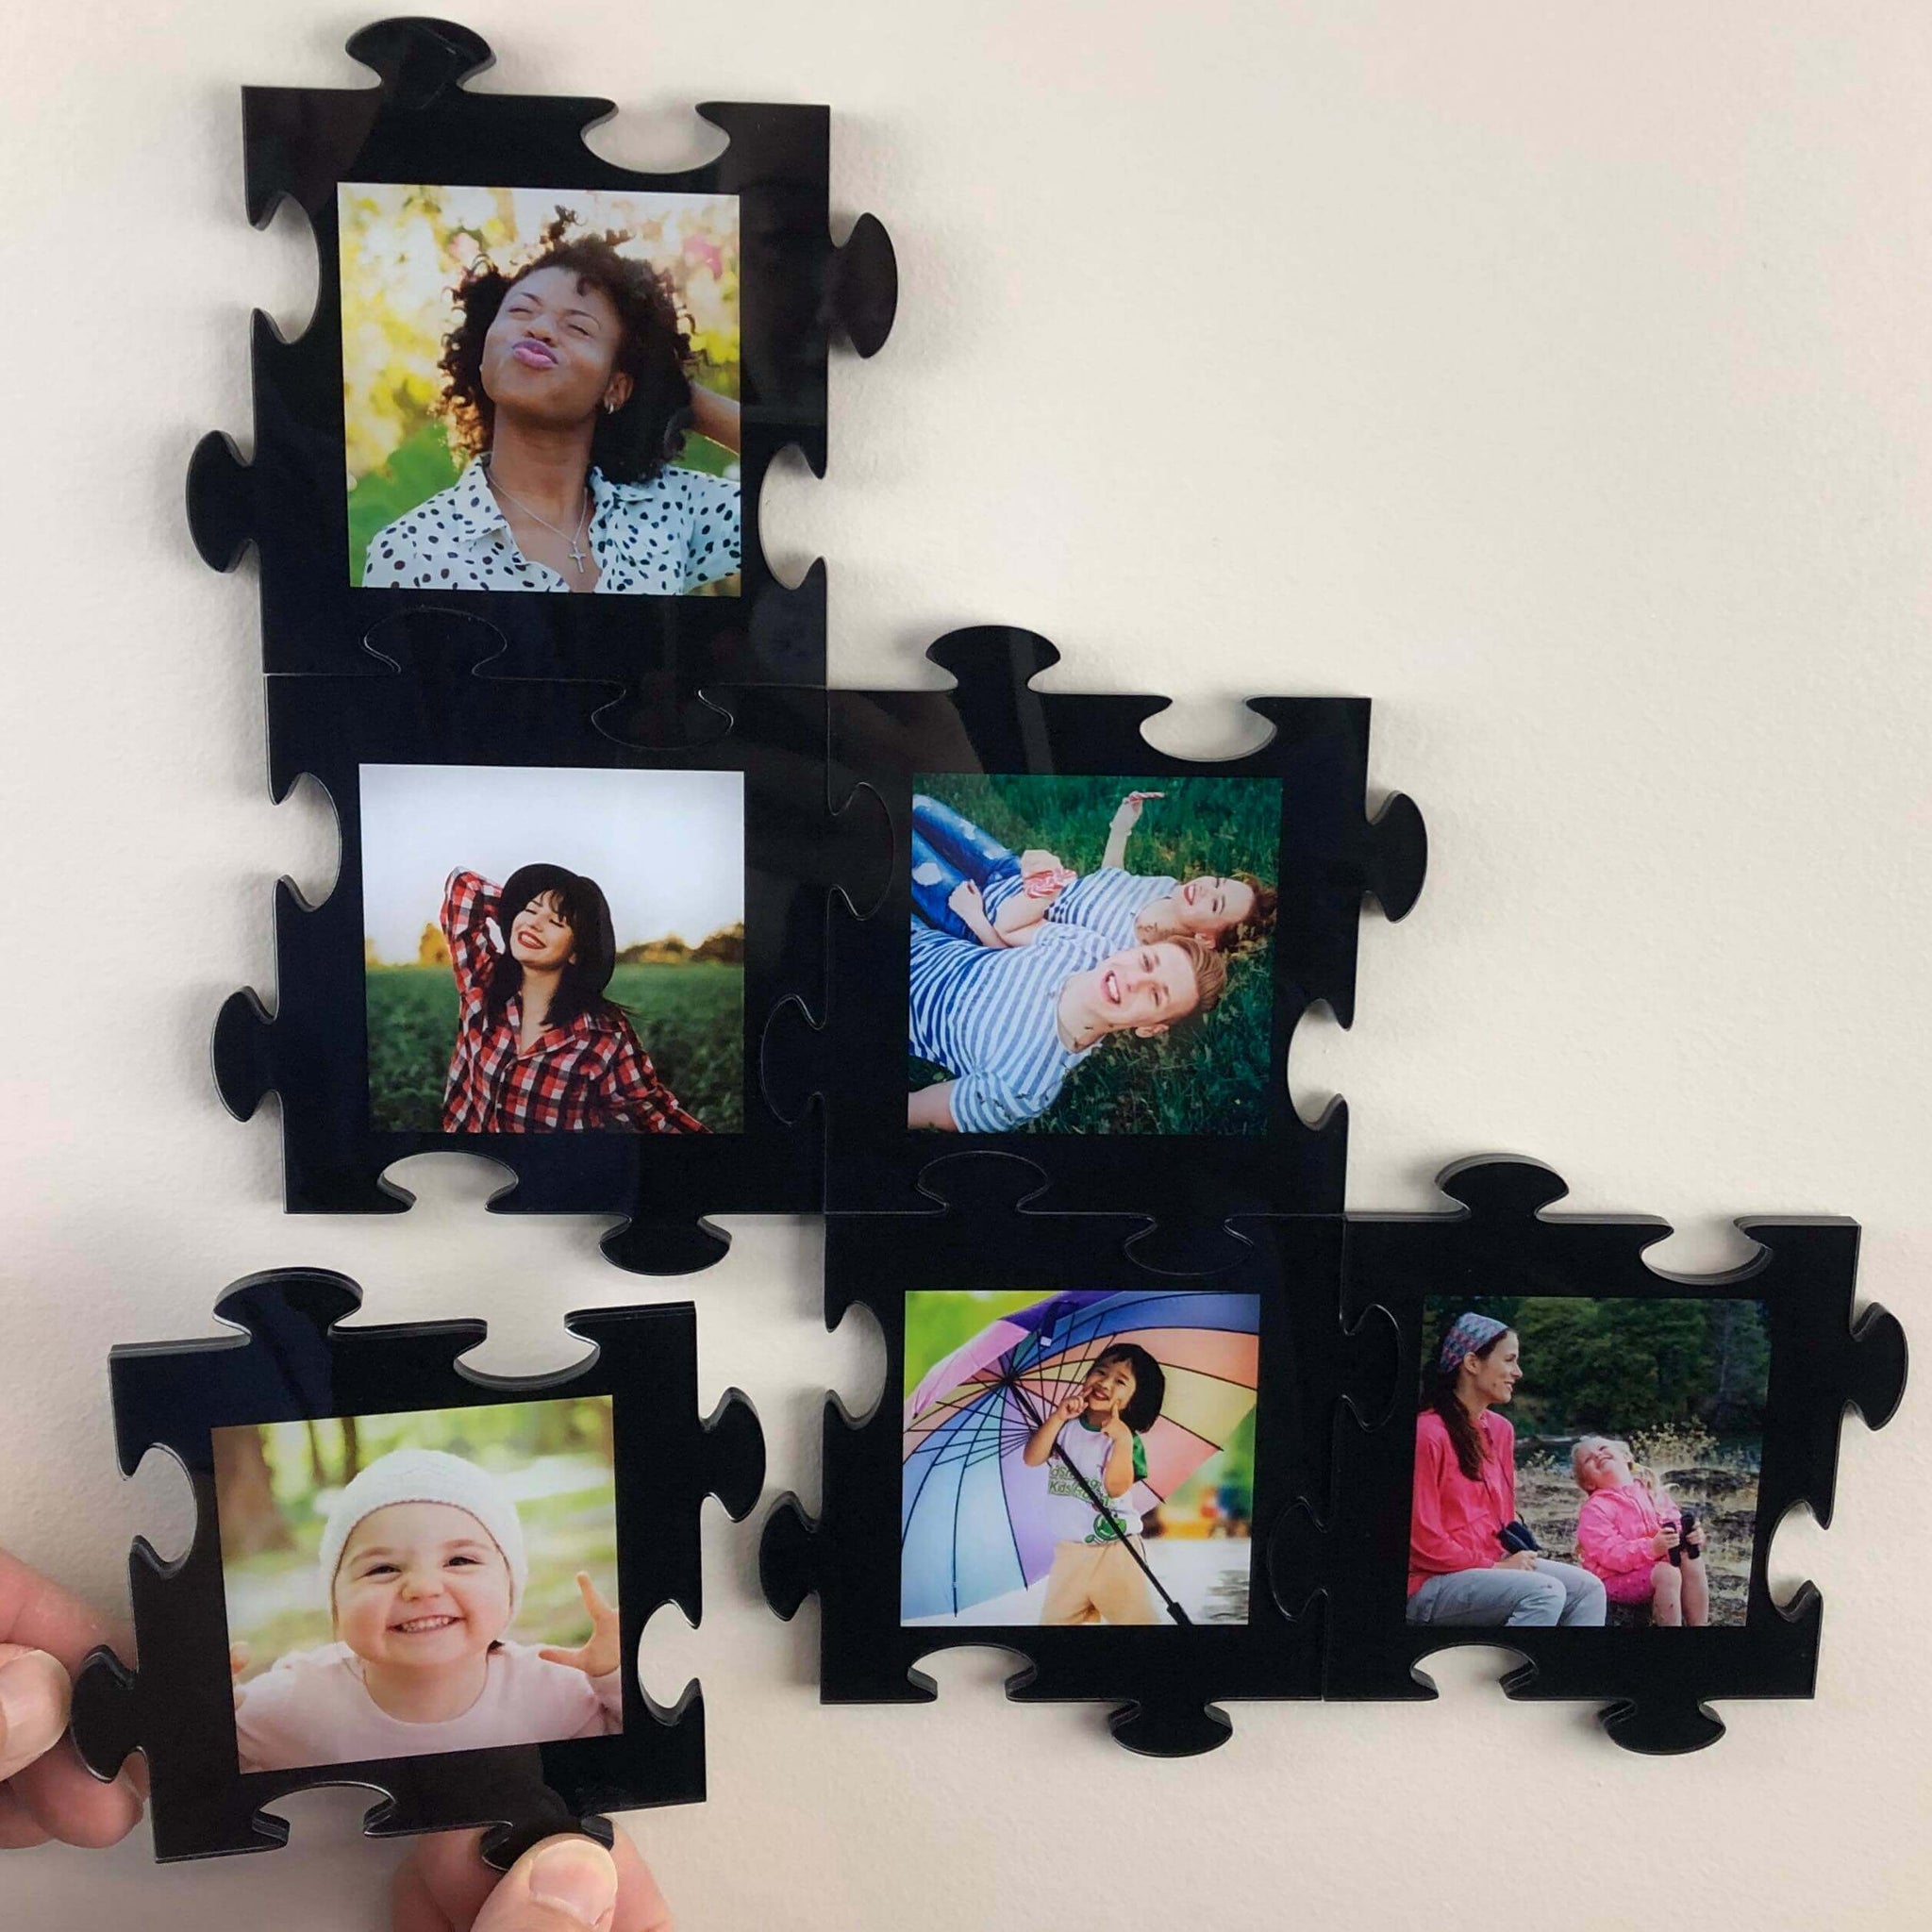 Happy Reunion 8x8 Picture Tiles | Mix Tiles Picture Frames Stick on Wall |  Photo Tiles Peel and Stick Picture Frames as Gallery Wall Frame Set (Black